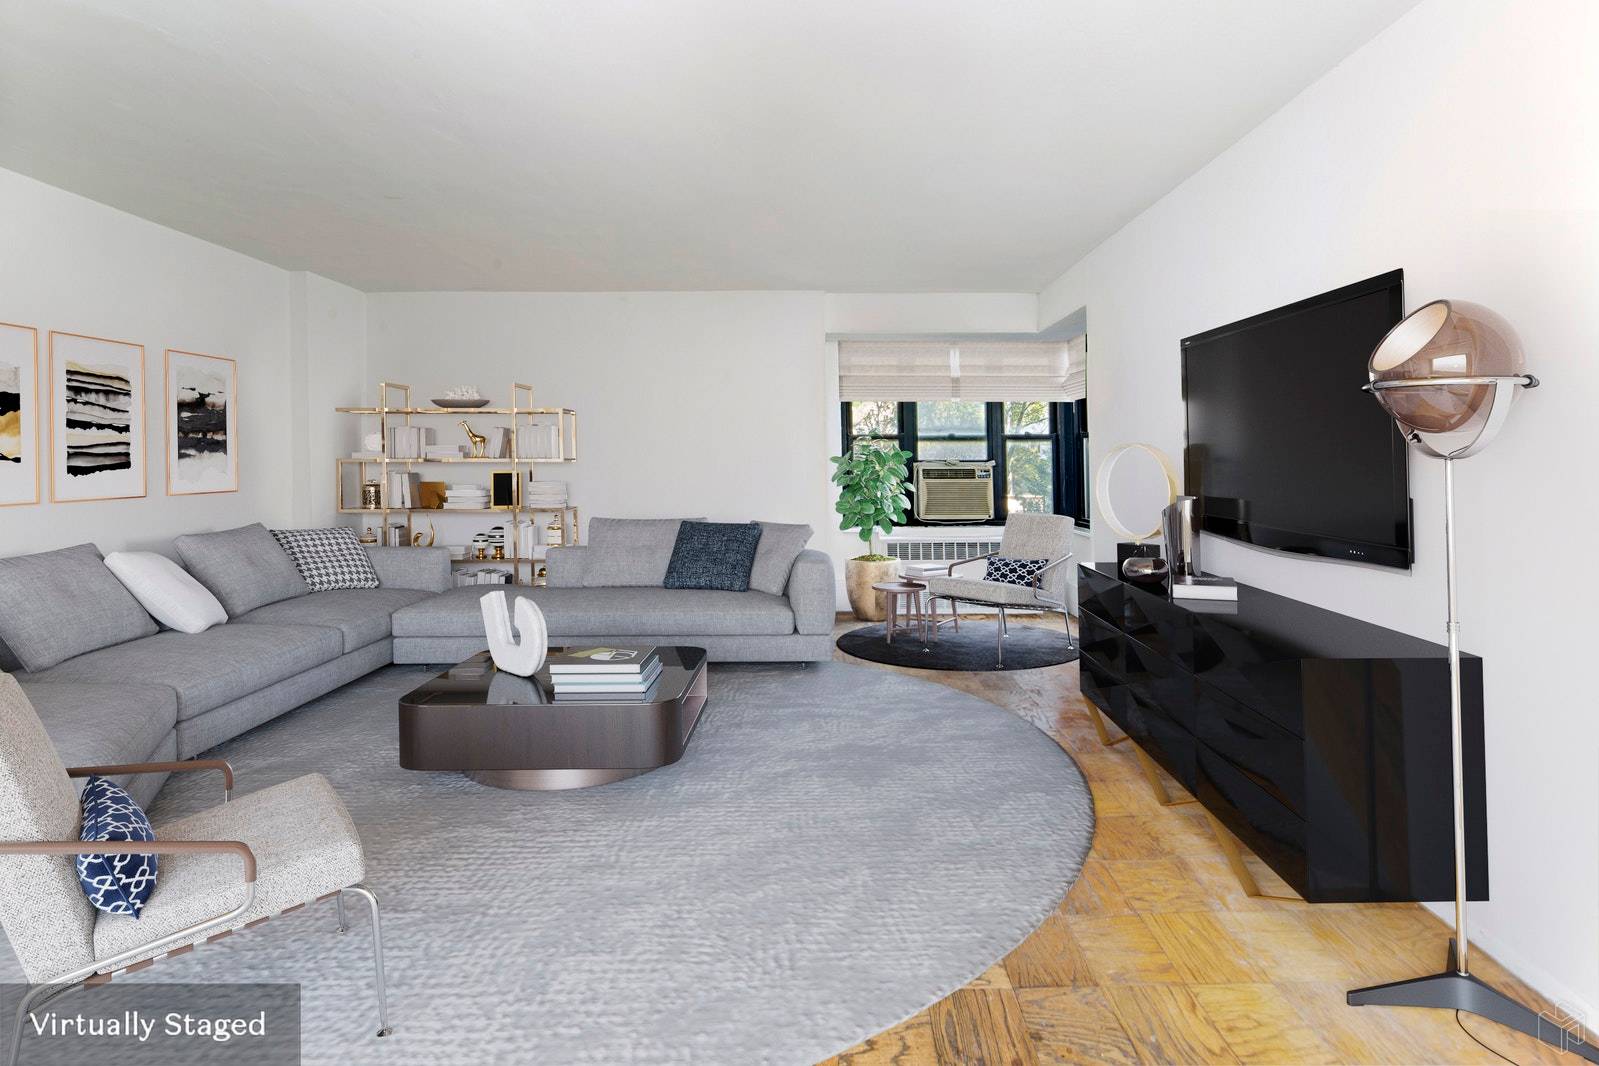 Excellent opportunity to fully customize a spacious 2BR located in the heart of the new lower east side !